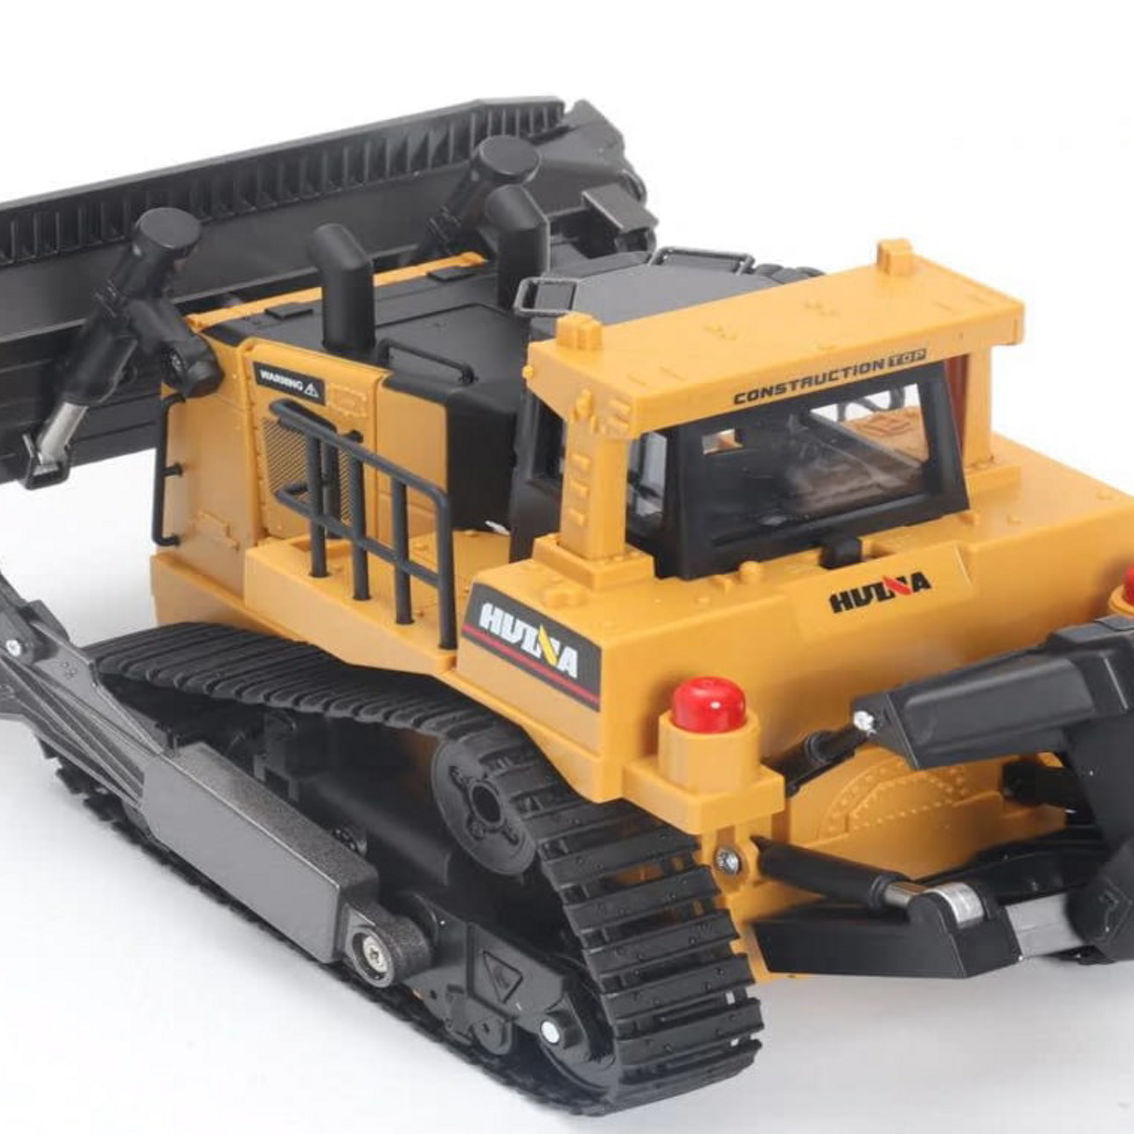 CIS-1569 1:16 scale 11 Ch Bulldozer with 2.4 GHz remote and rechargeable batteries - Image 4 of 5